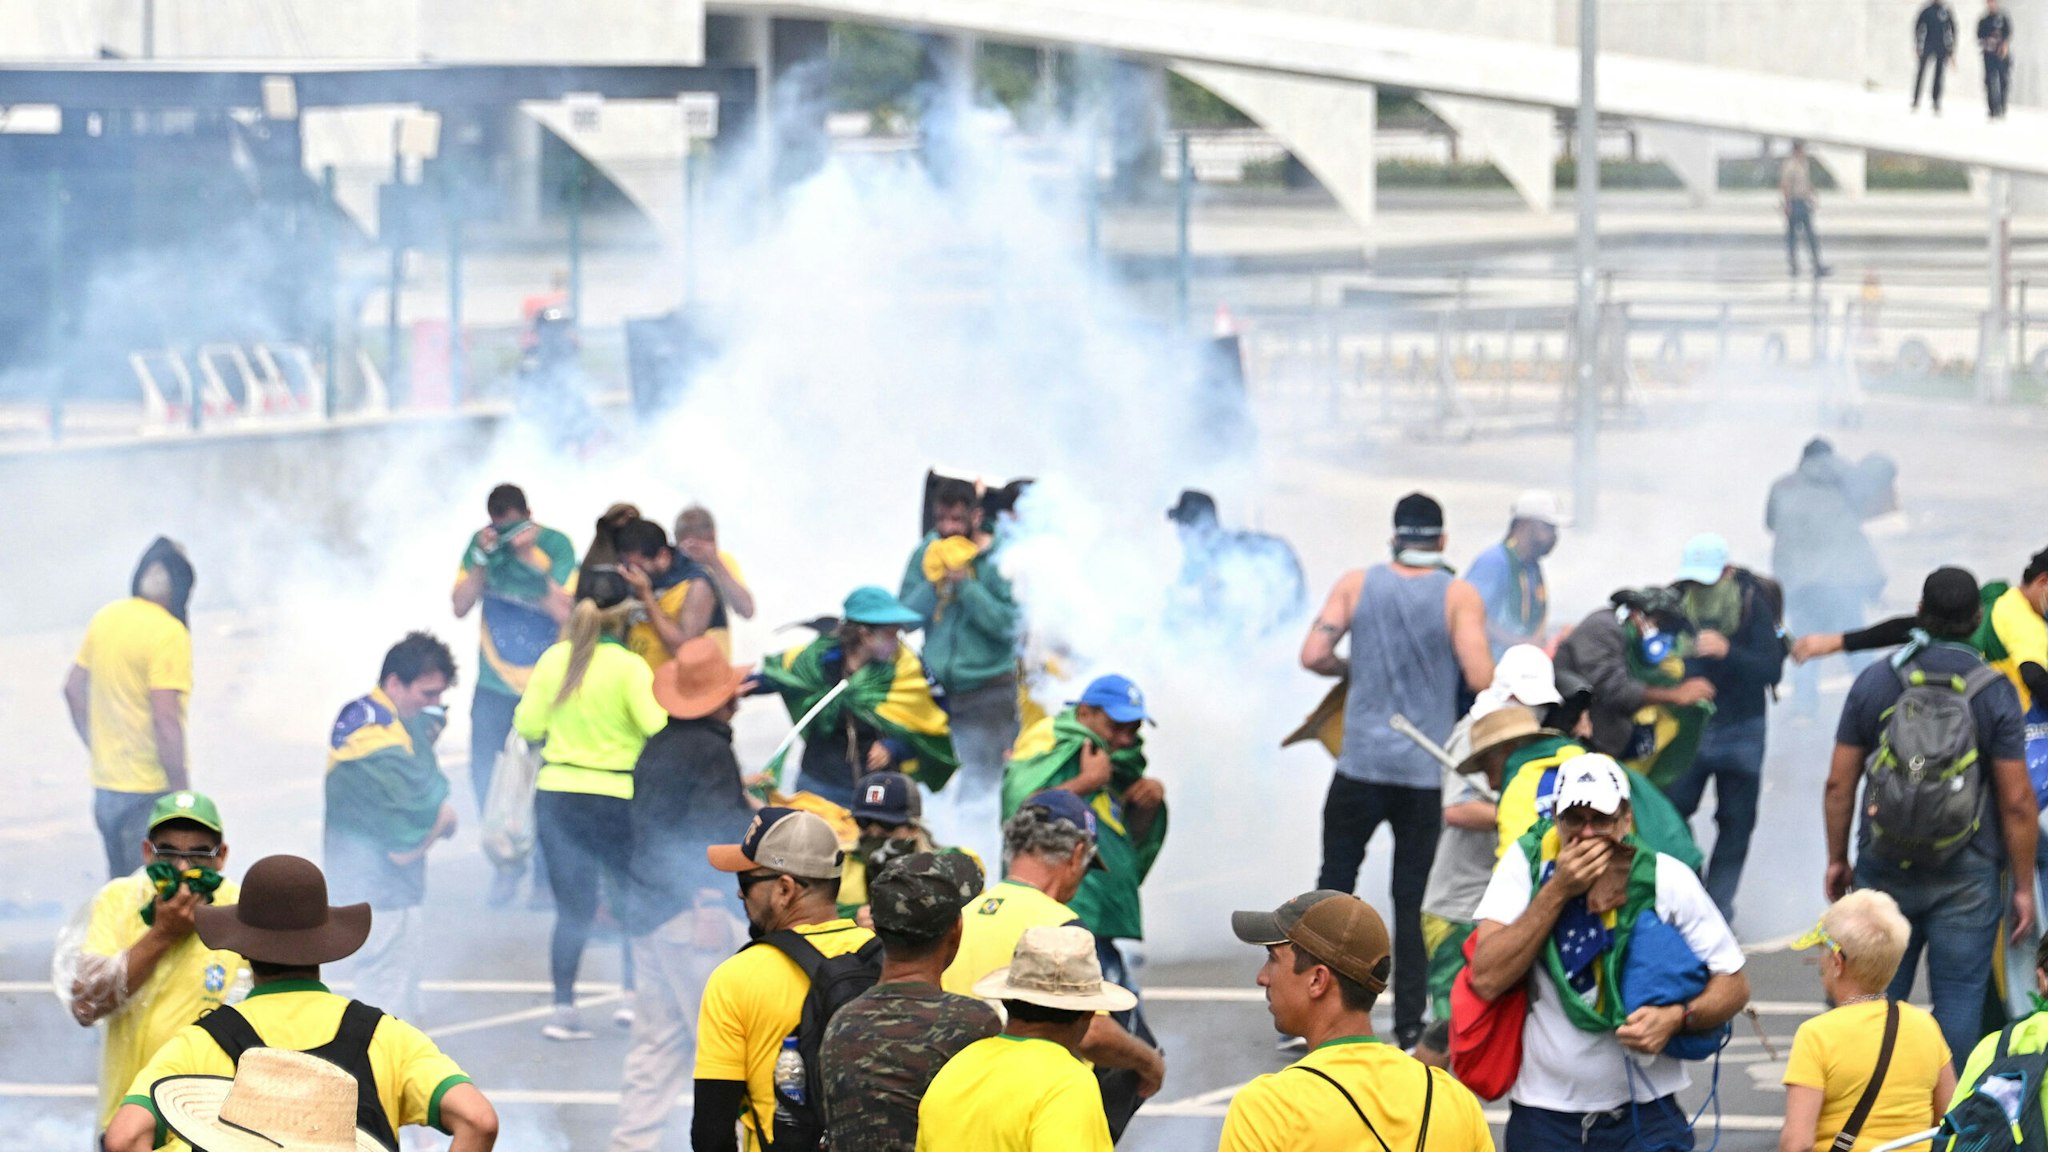 Supporters of Brazilian former President Jair Bolsonaro clash with the police during a demonstration outside the Planalto Palace in Brasilia on January 8, 2023. - Brazilian police used tear gas Sunday to repel hundreds of supporters of far-right ex-president Jair Bolsonaro after they stormed onto Congress grounds one week after President Luis Inacio Lula da Silva's inauguration, an AFP photographer witnessed.